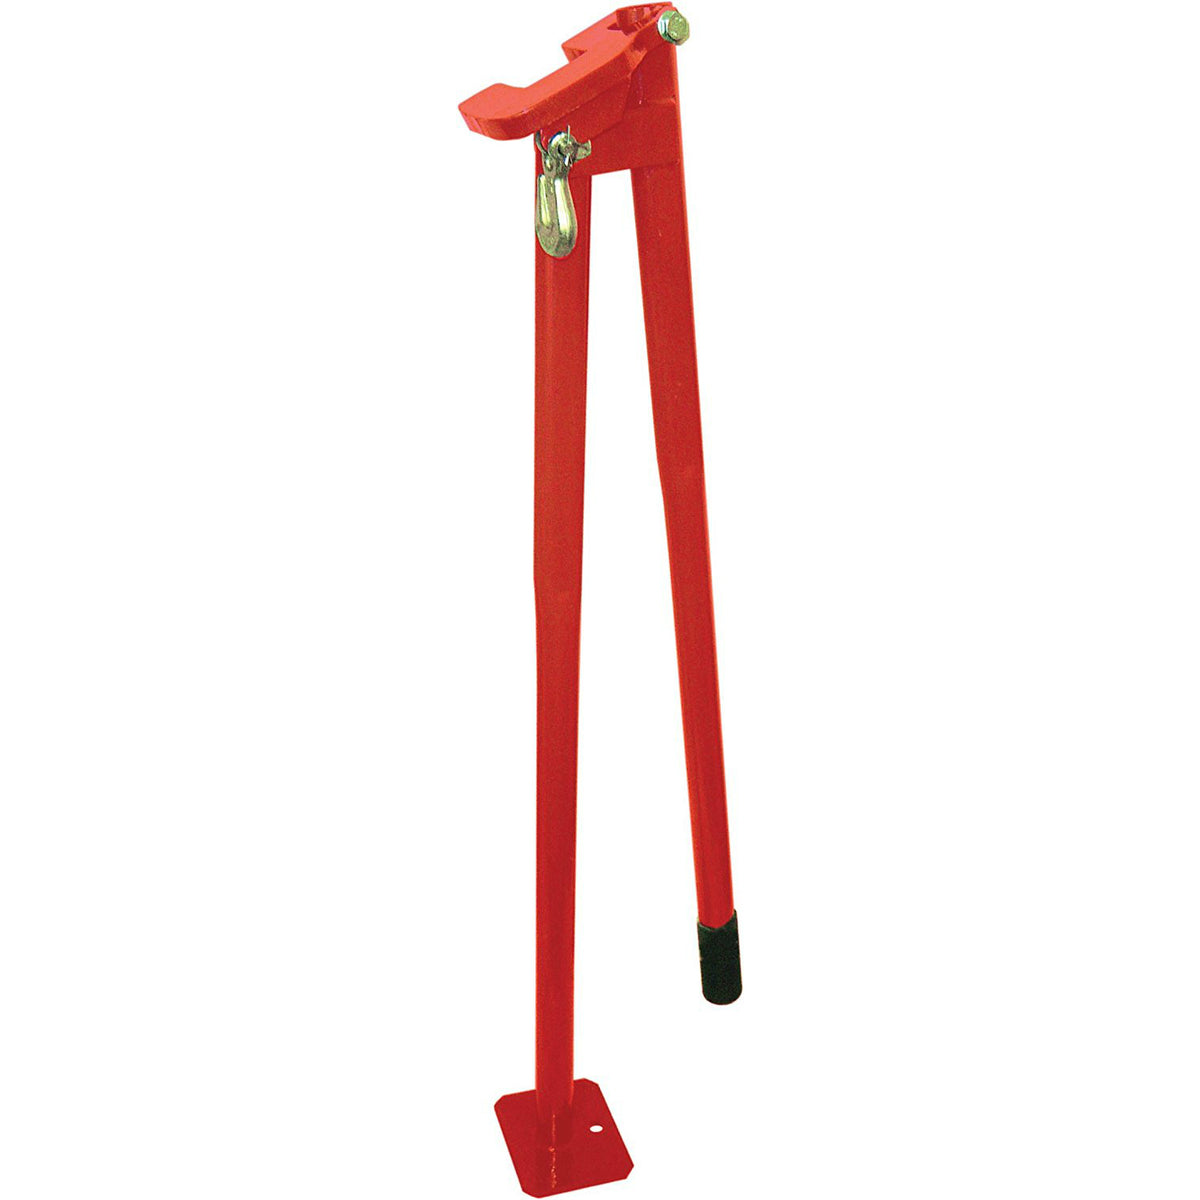 American Power Pull 14600 Post Puller with Long Handle, Red, 36"